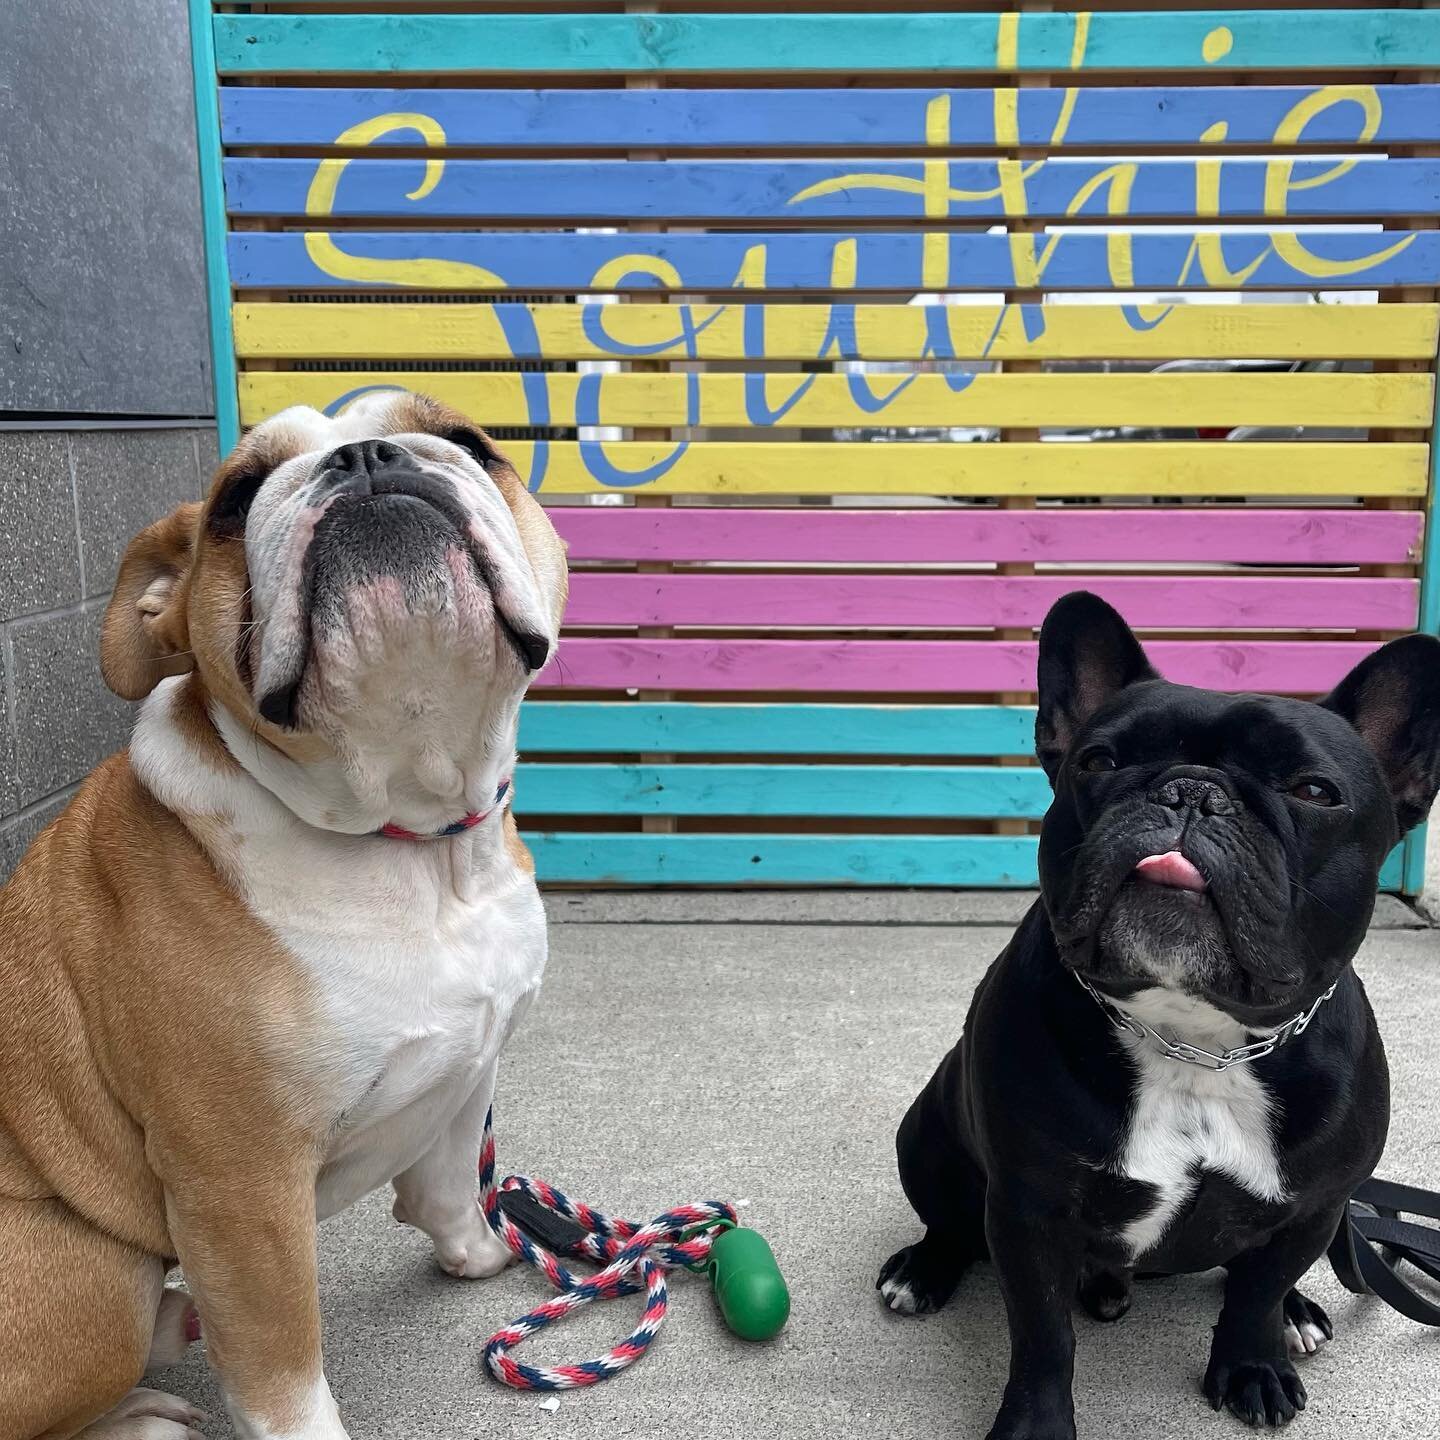 #party on #southie 🎉 it&rsquo;s #friyay 🙌 🐾 #hamilton 🐾 @lincolnthebully 
:
:
:
:
:
:
#happypawsboston #happiness #happyboys #dogsofinstagram #dog #dogs #southiedogs #dogsofinstagram #dogsofinsta #dogsofsouthboston #02127 #bulldog #bulldogsofinst